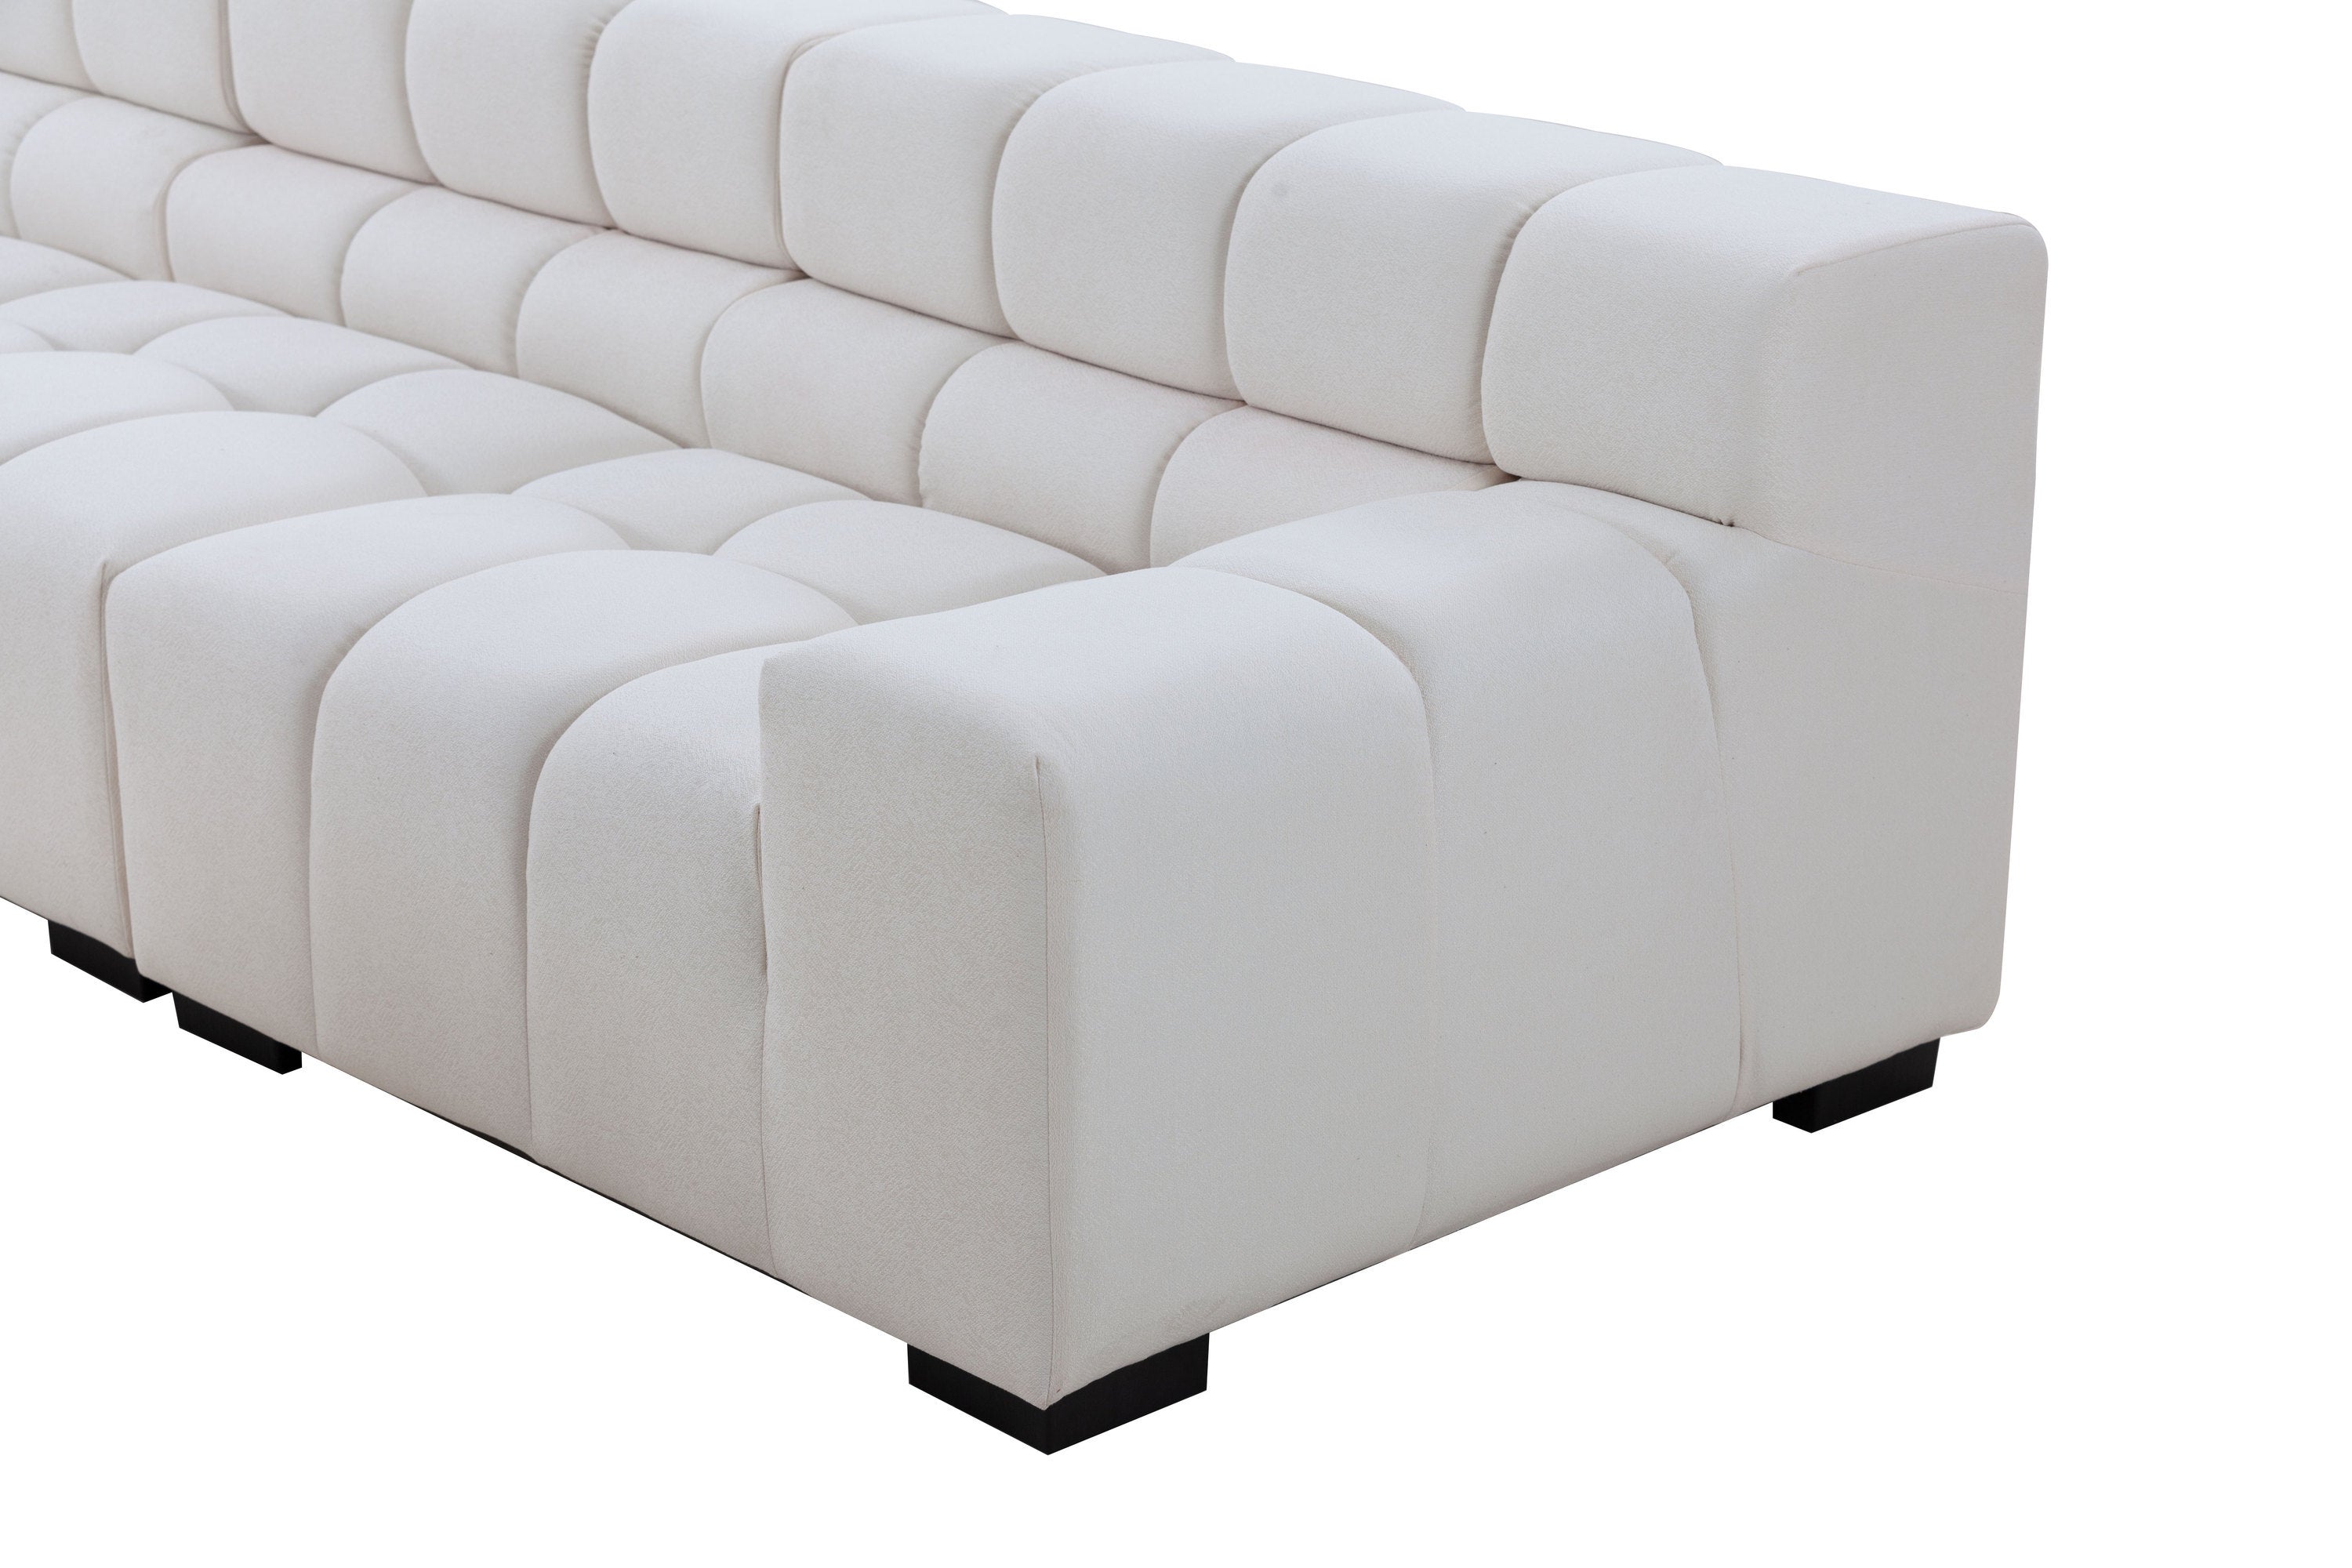 L-Shaped Sectional Sofa Modular Seating Sofa Couch with Ottoman